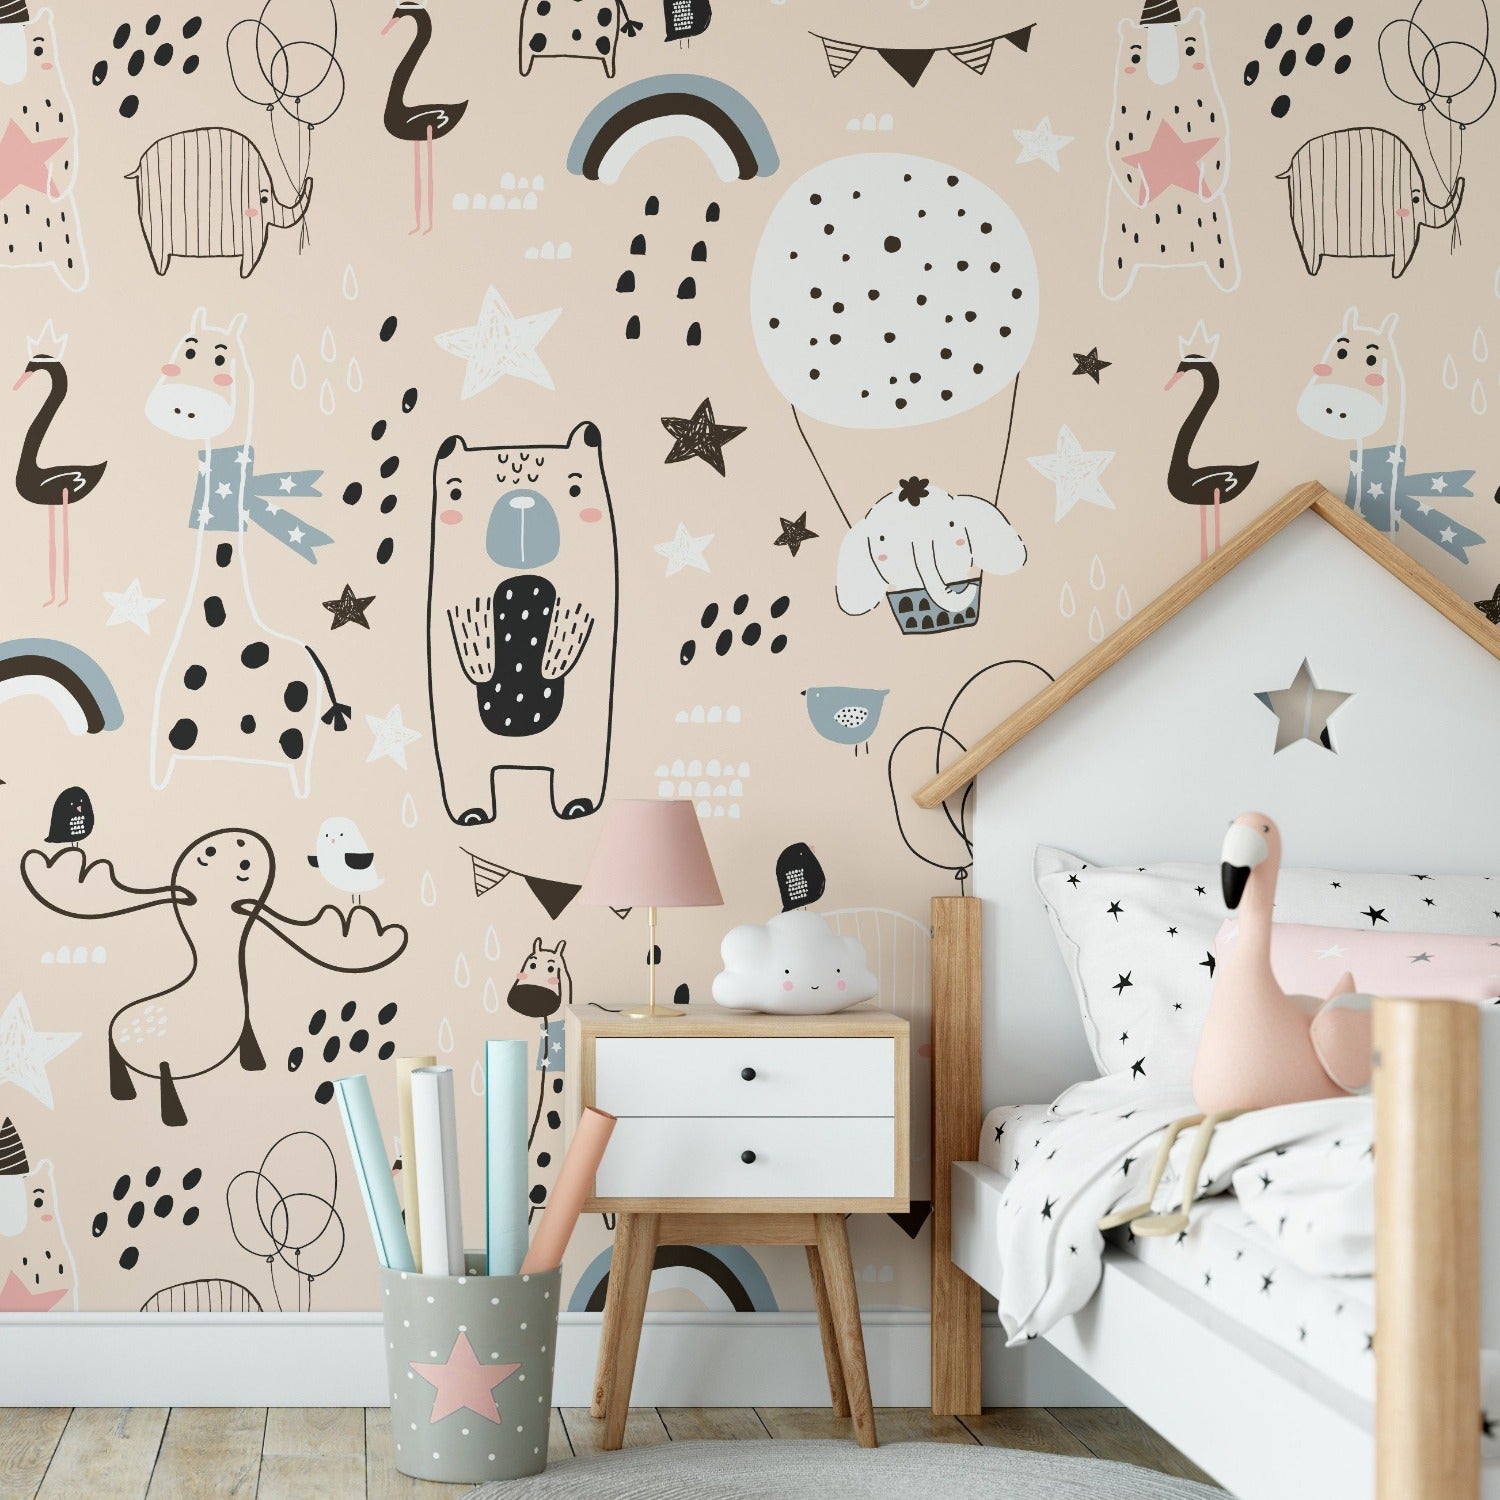 "Decorated kids' room featuring Timberlea Interiors whimsical animal doodle wallpaper in soft beige, enhancing a playful and creative space."